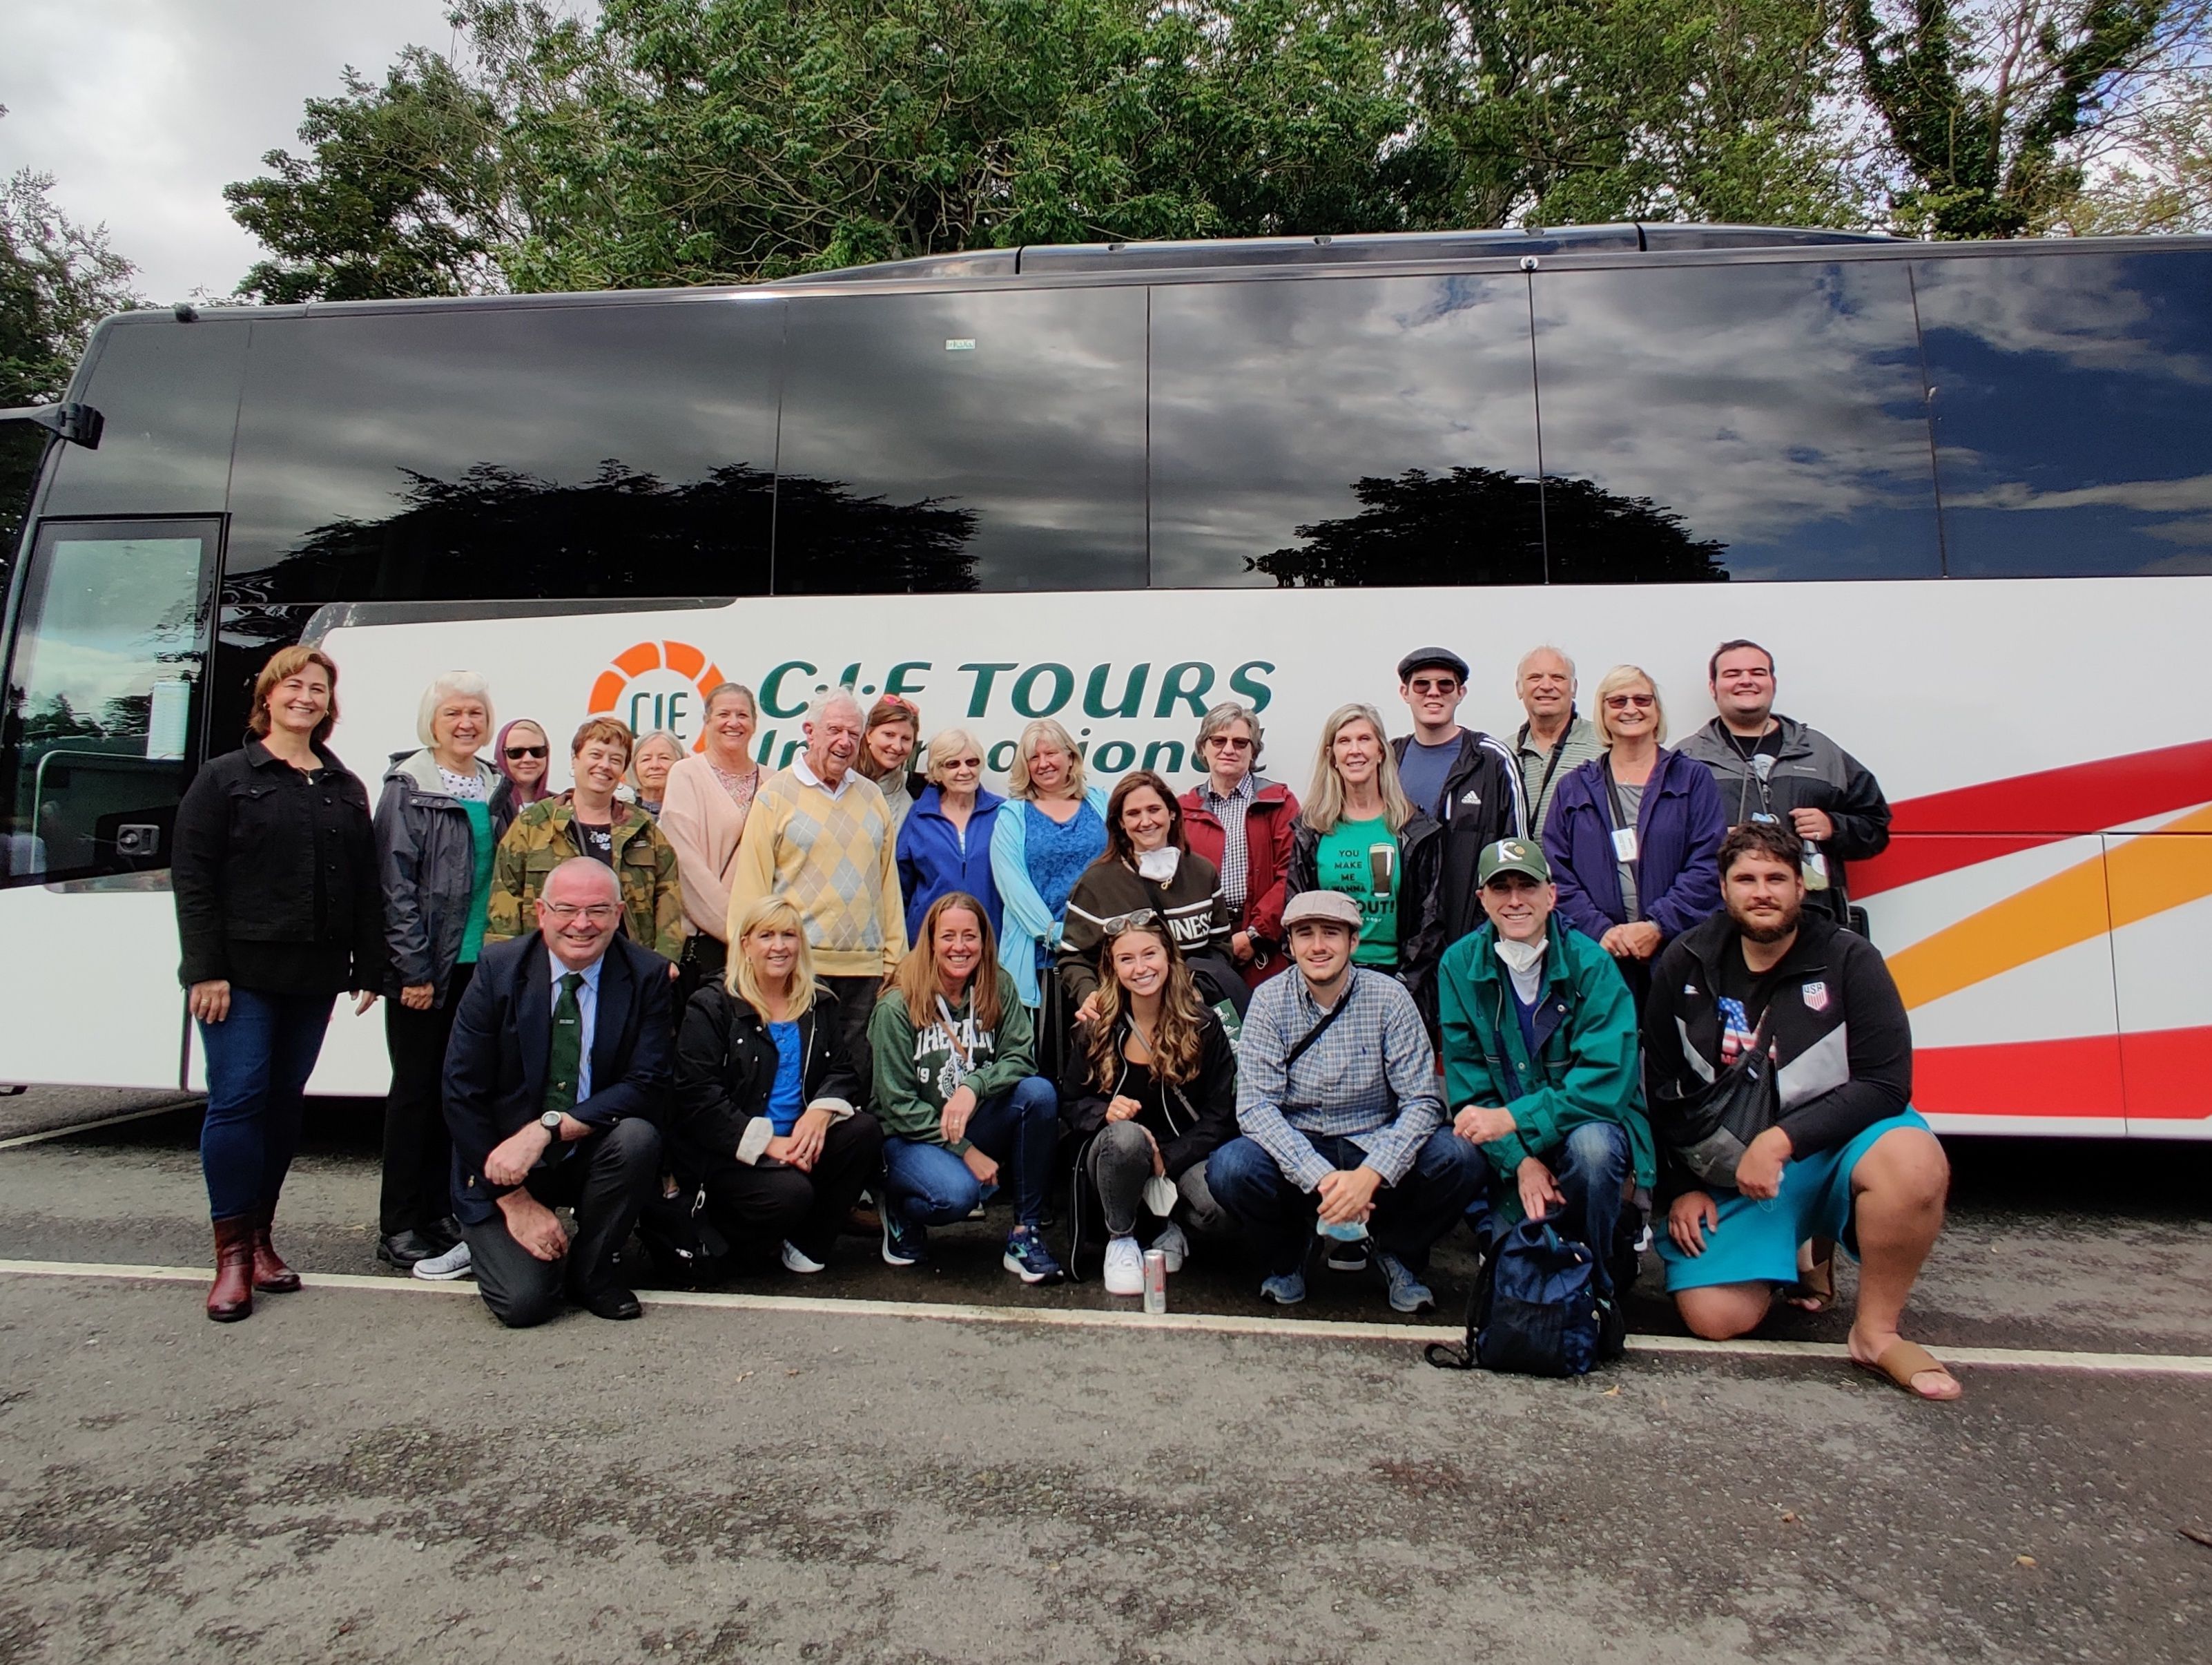 CIE Tours are back on road of Ireland